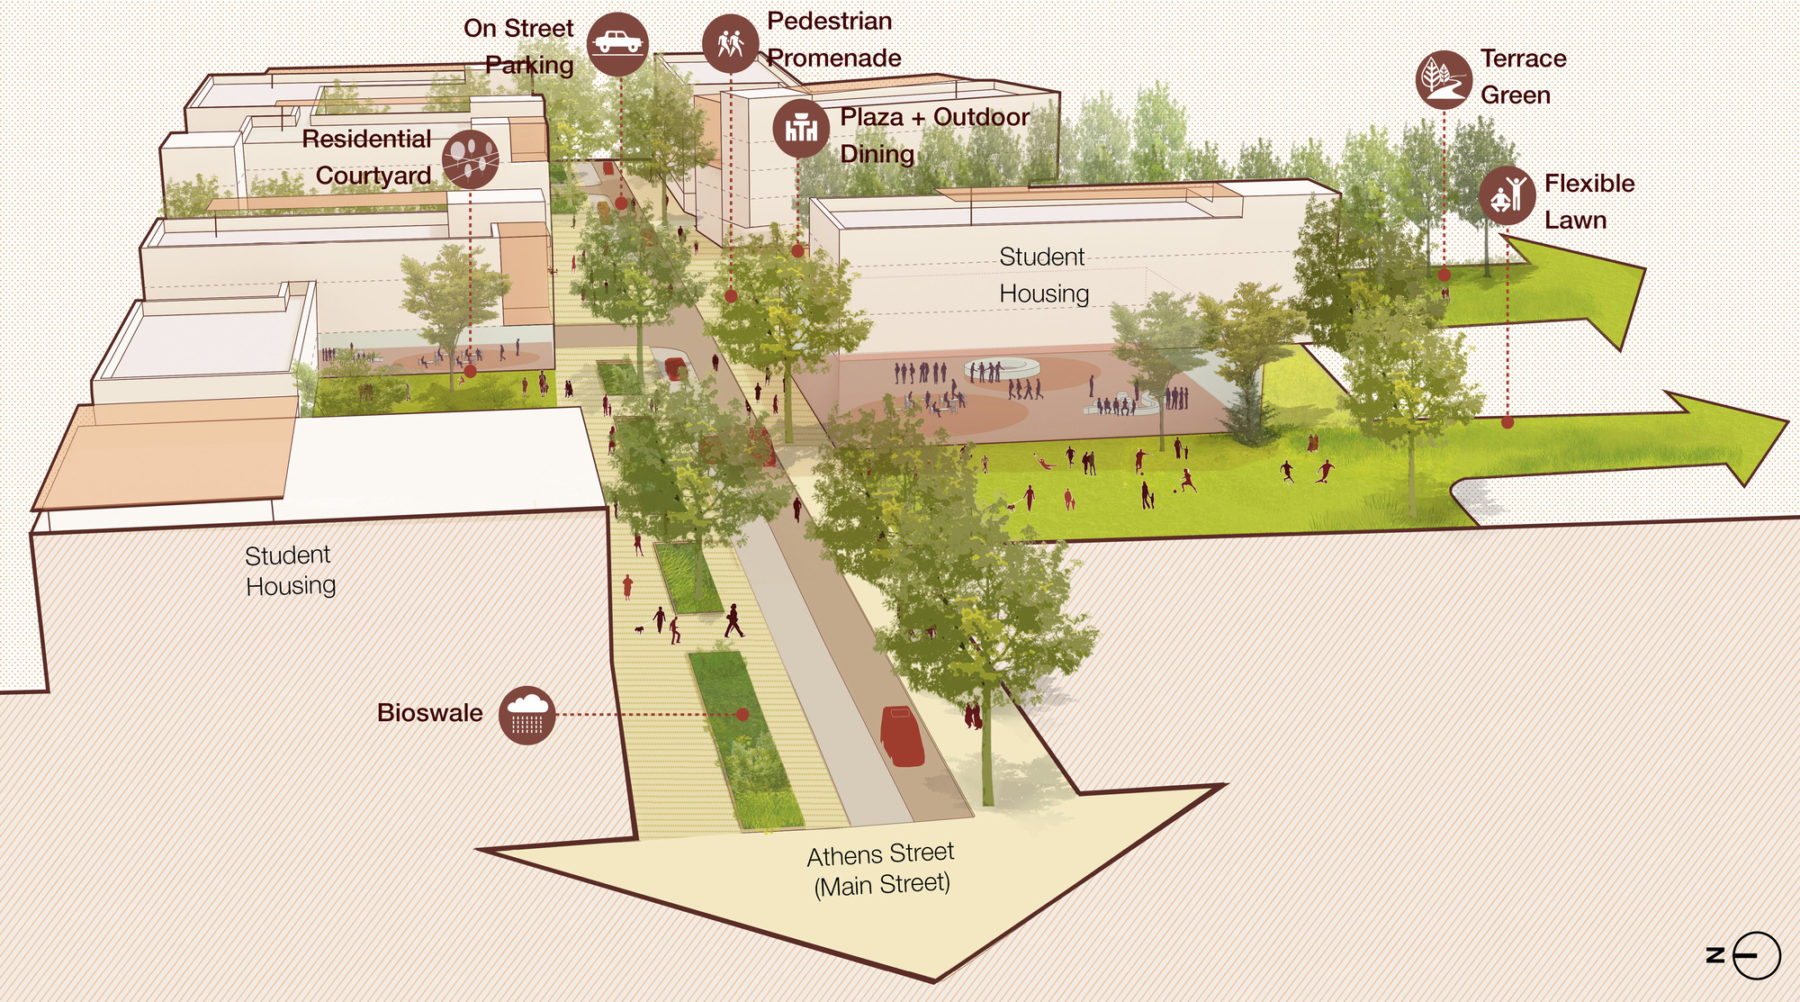 section axon of campus district highlighting amenities